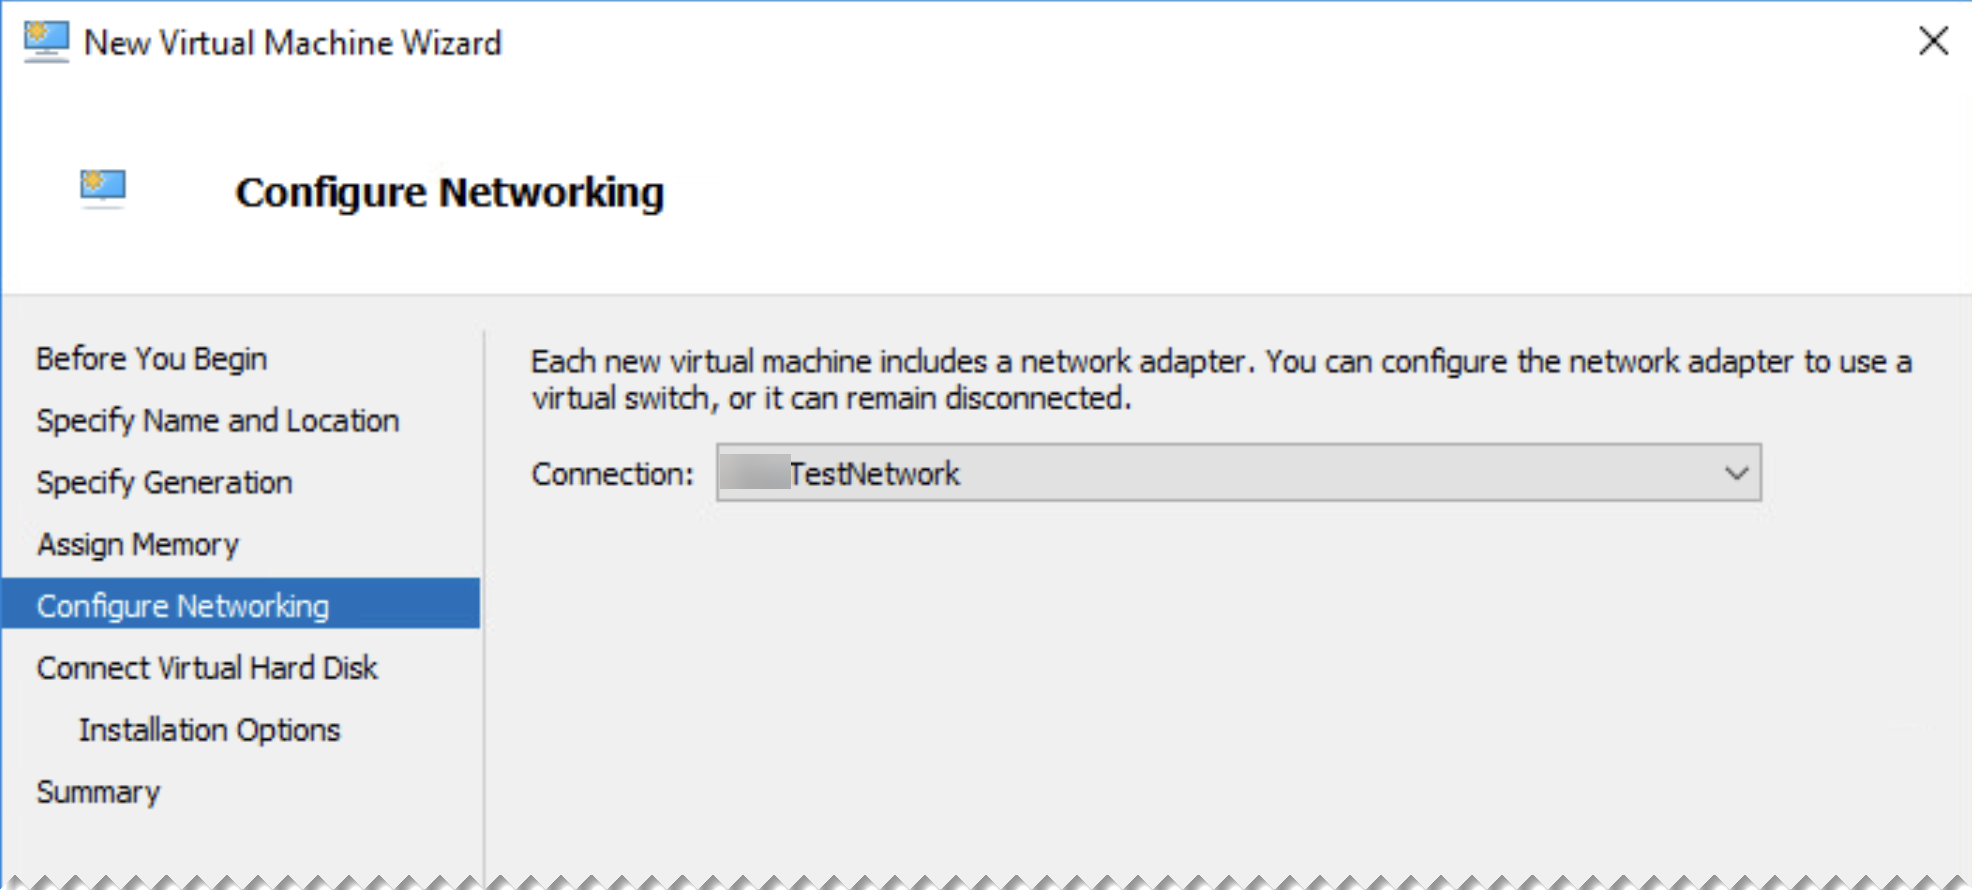 Configure Networking page.